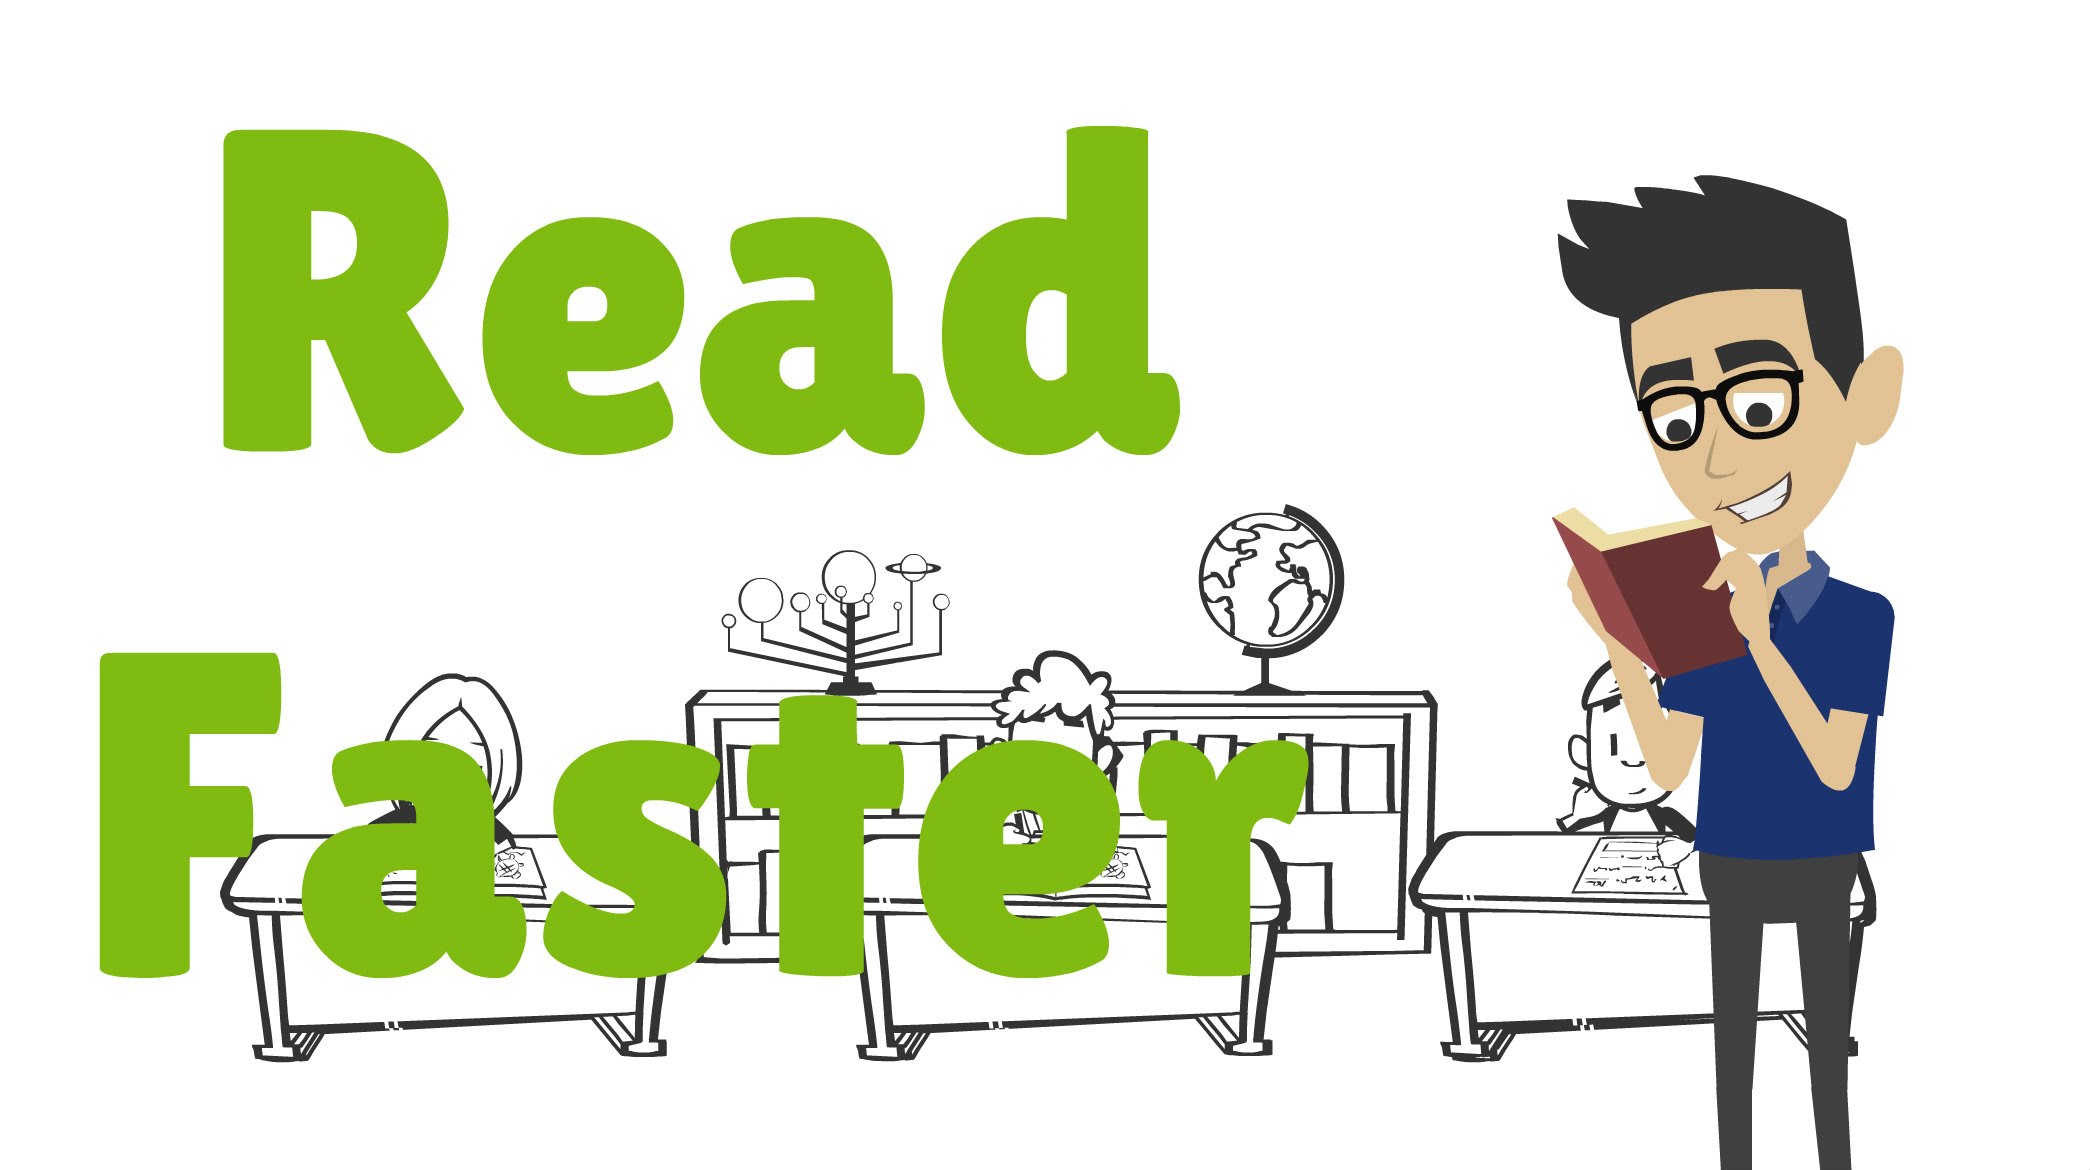 How to read better. Read faster. How read faster. Read fast. Read faster [b41+MP].